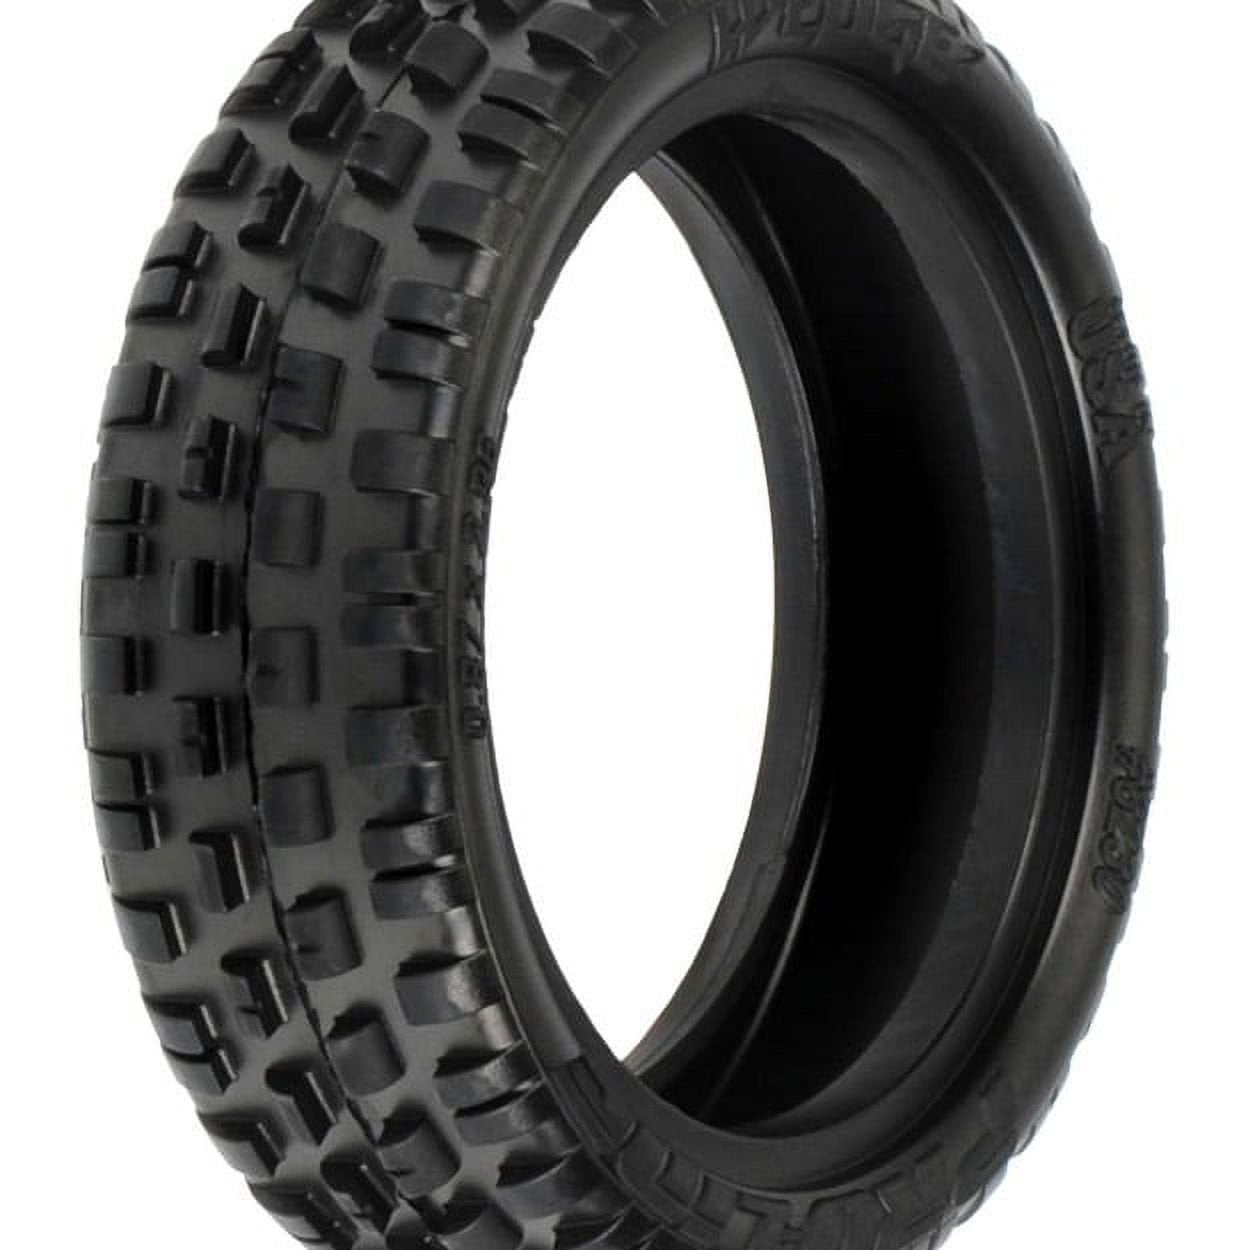 PRO8230104 2.2 Wedge Squared 2WD Z4 Soft Carpet Off-Road Buggy Tires